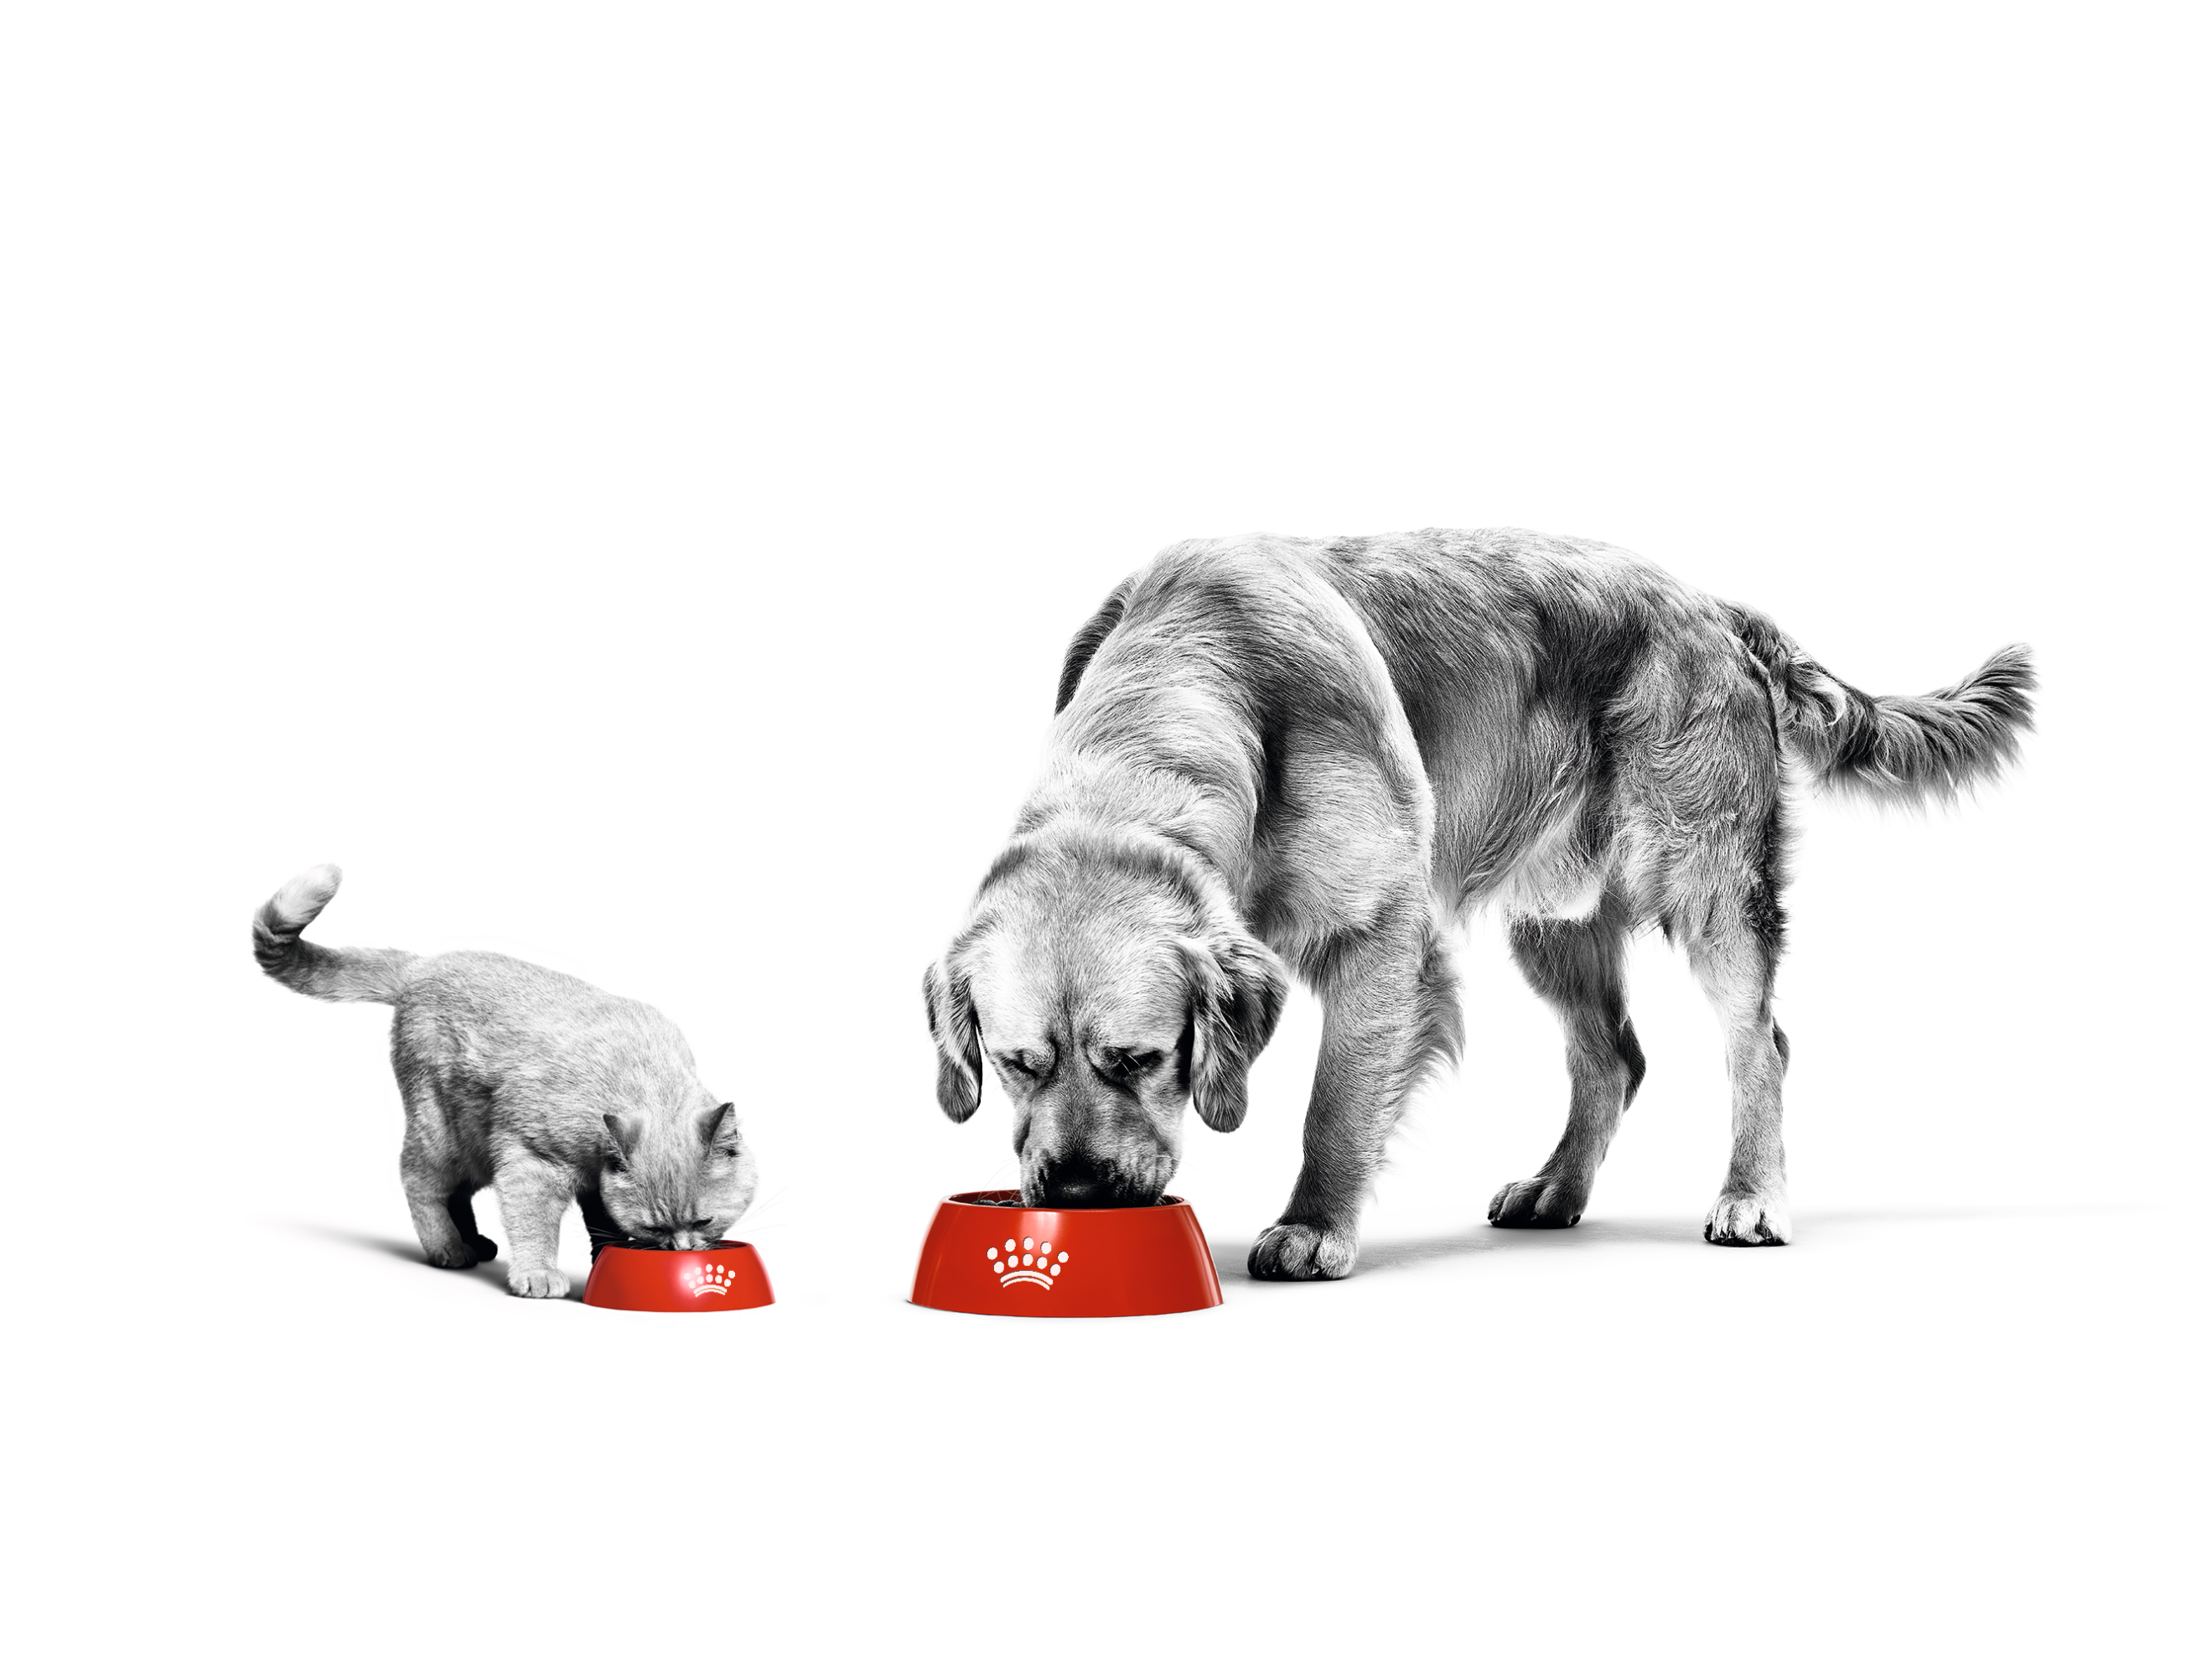 Cat and dog eating in a bowl